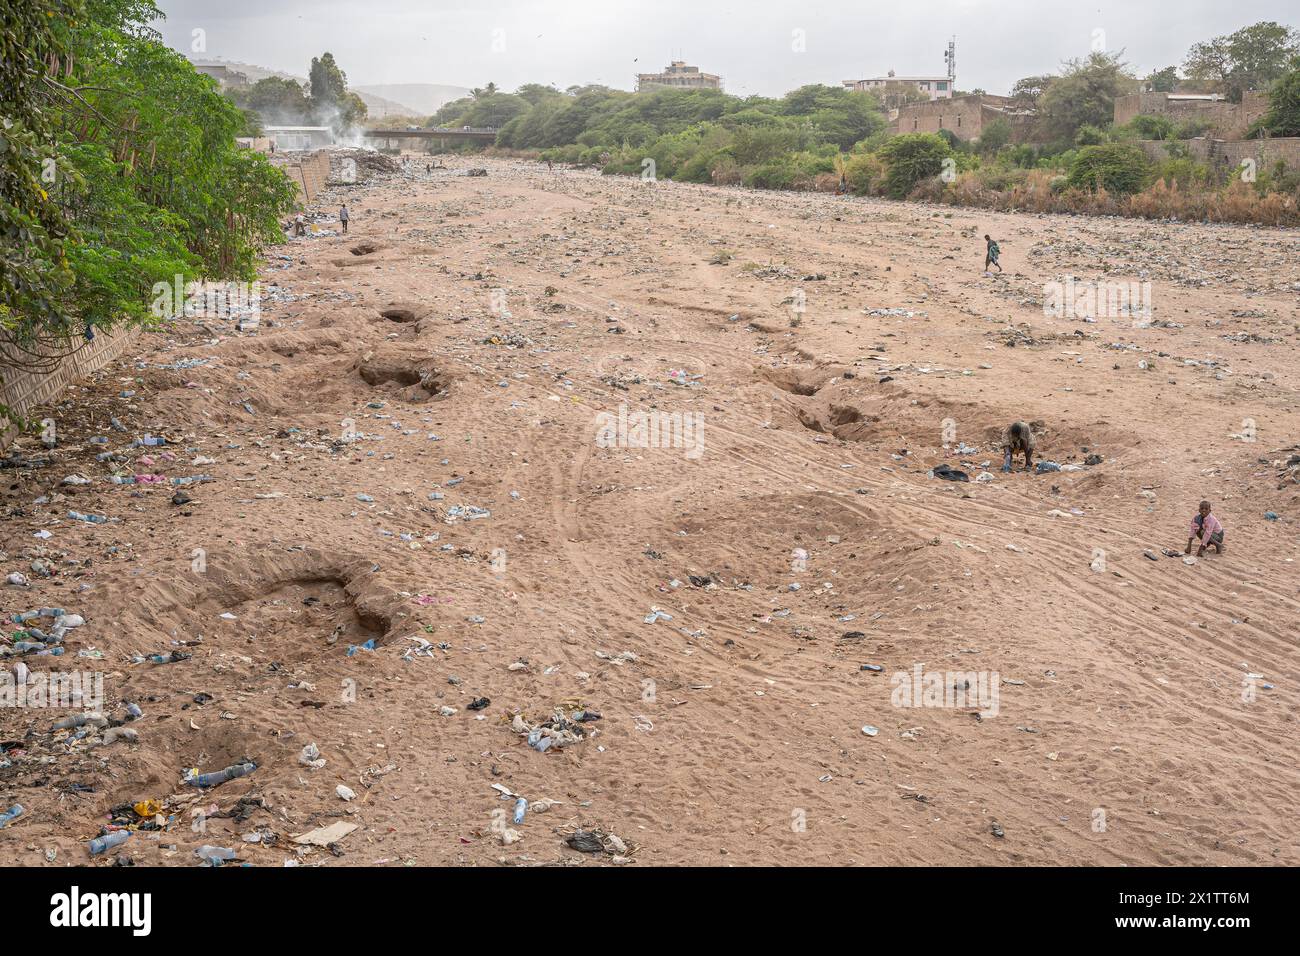 View of a dry river bed littered with piles of trash, mostly plastic, Djibouti Stock Photo